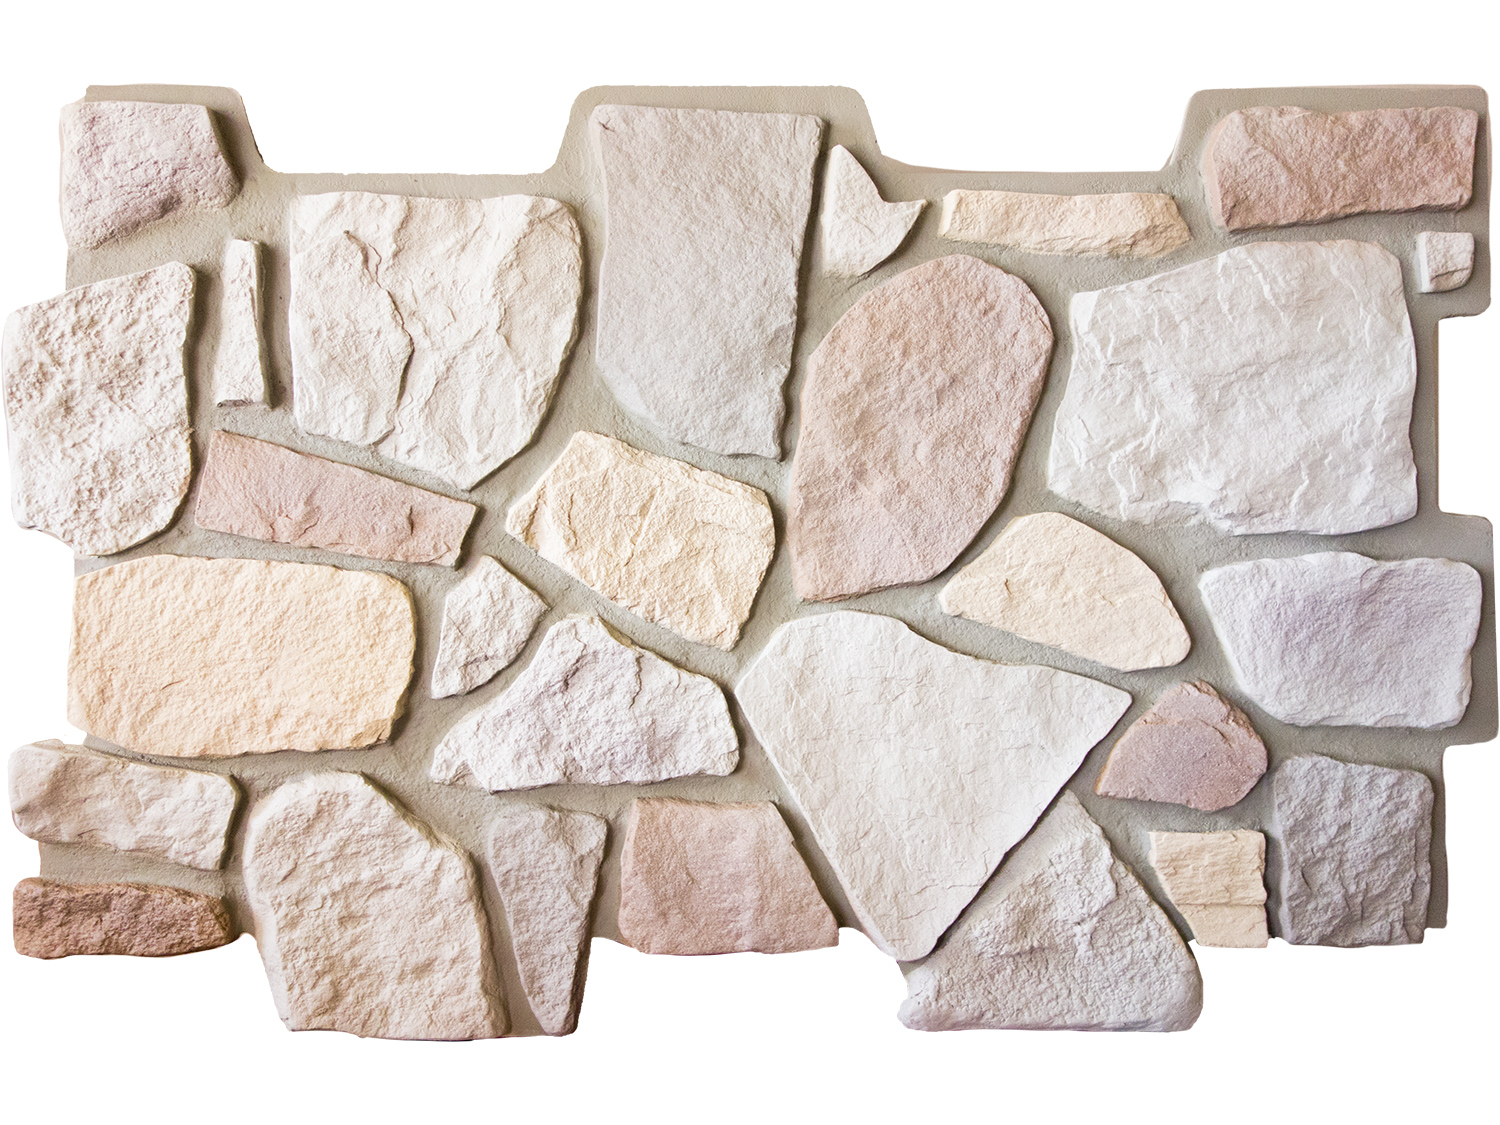 what are the dimensions of a Carlton Fieldstone panel?